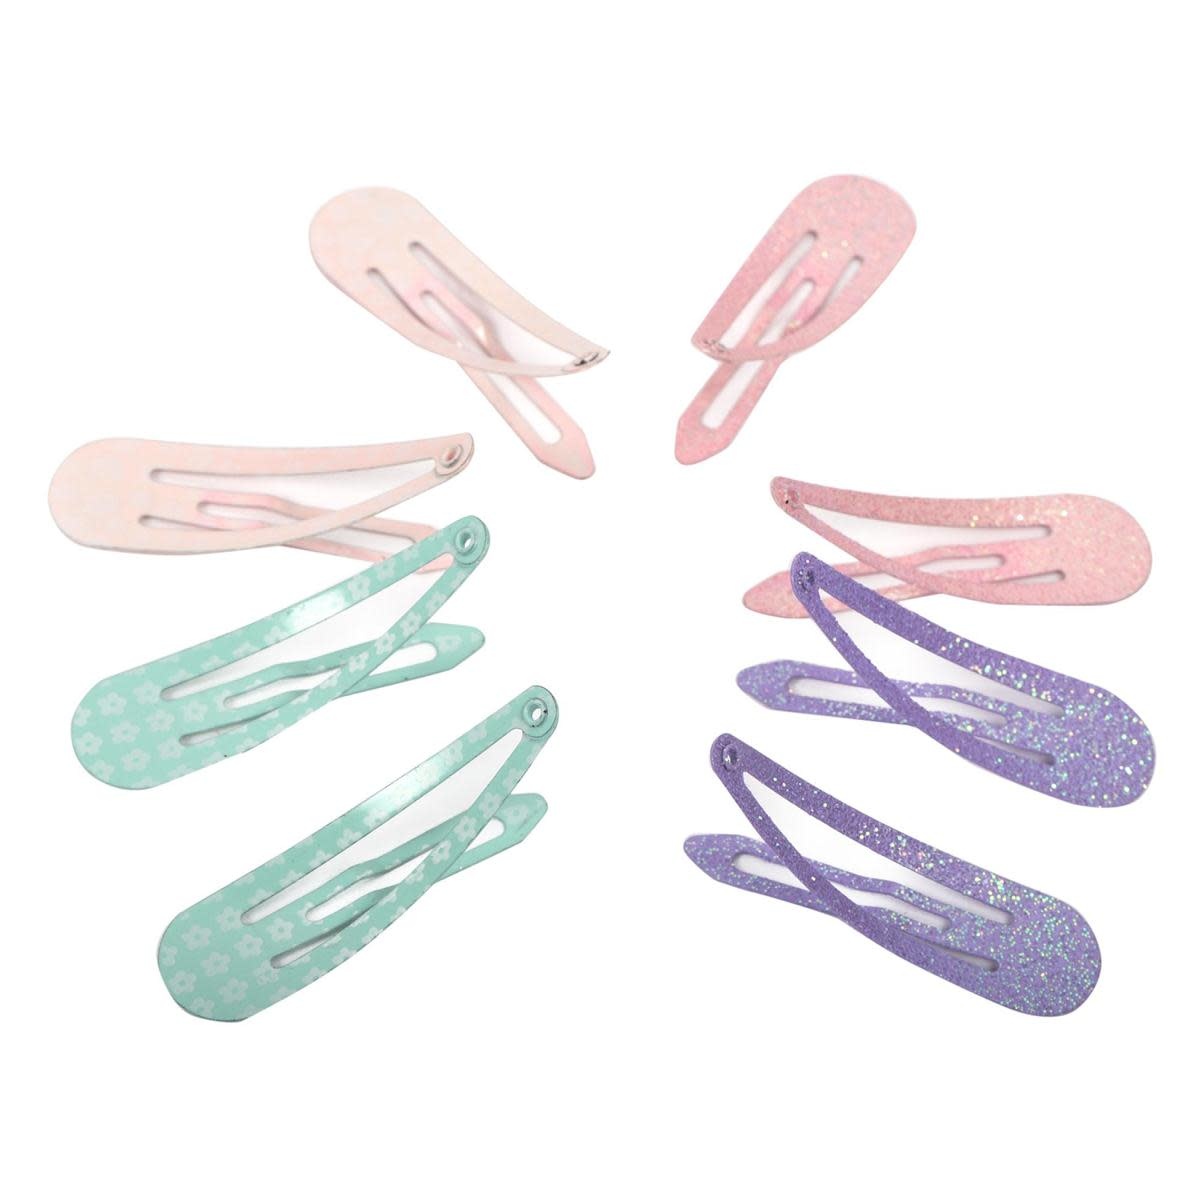 Barrettes, Stylin 76009, package of 8